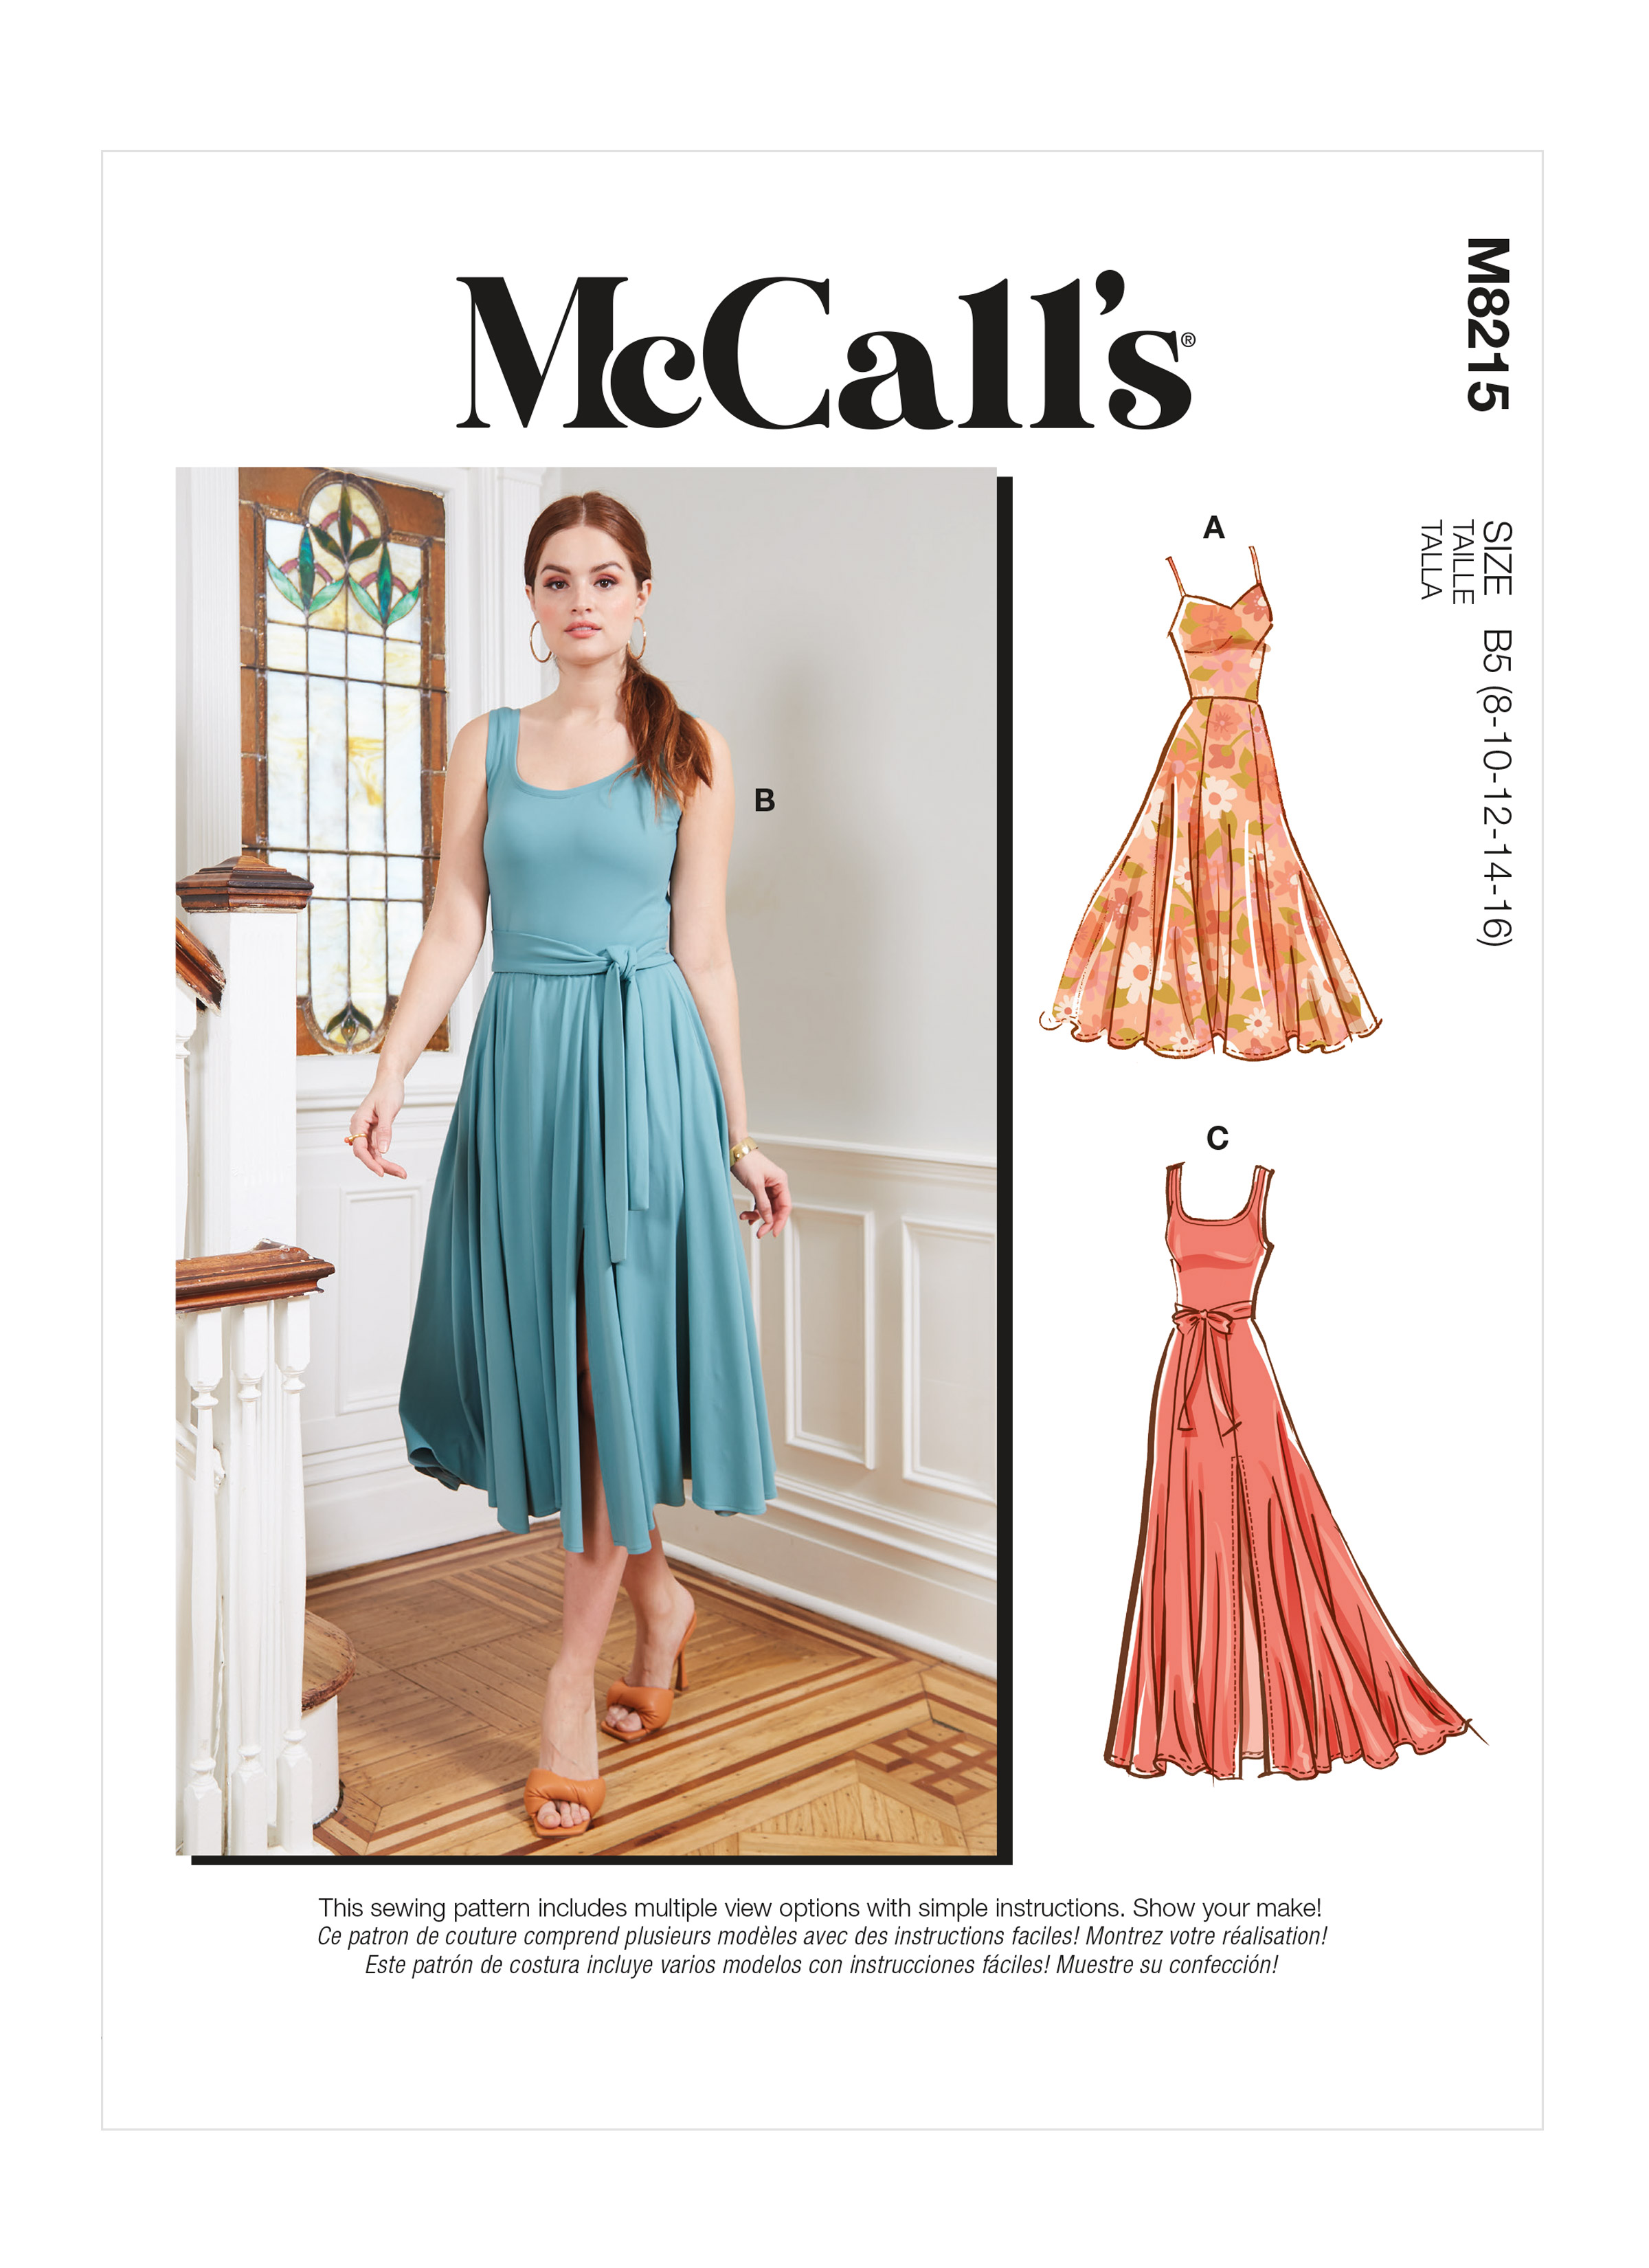 https://images.patternreview.com/sewing/patterns/mccall/2021/8215/8215.jpg